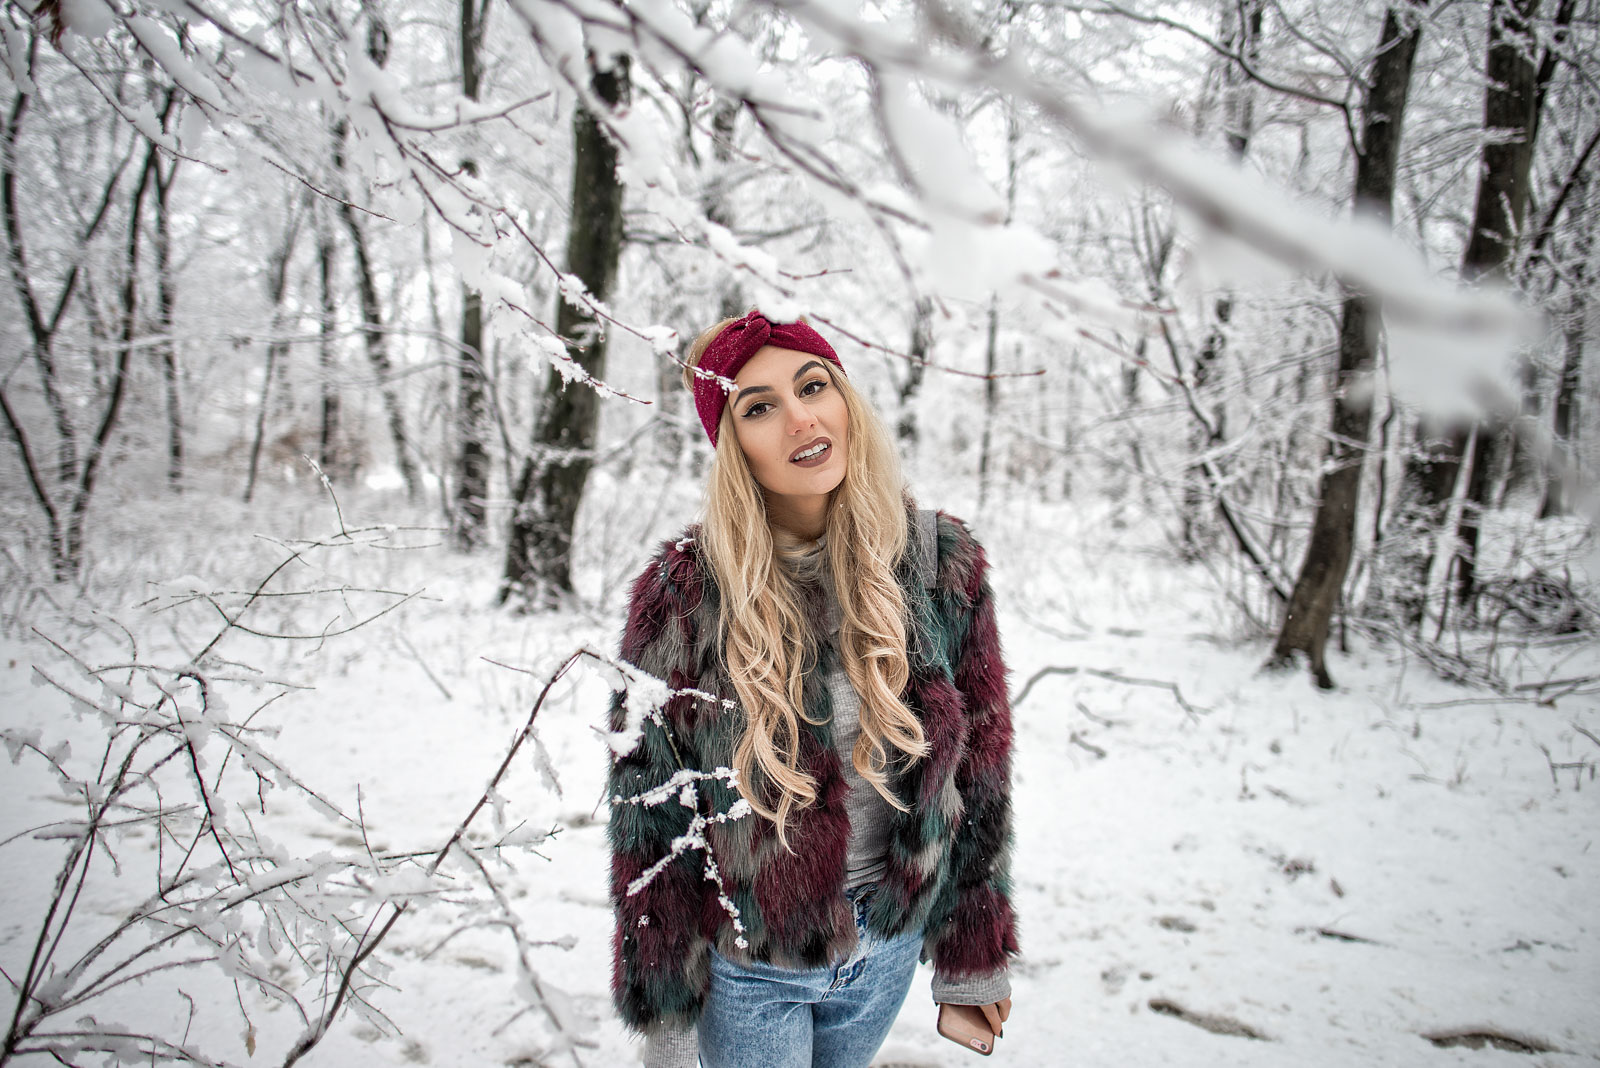 Chic and Warm in the Snow